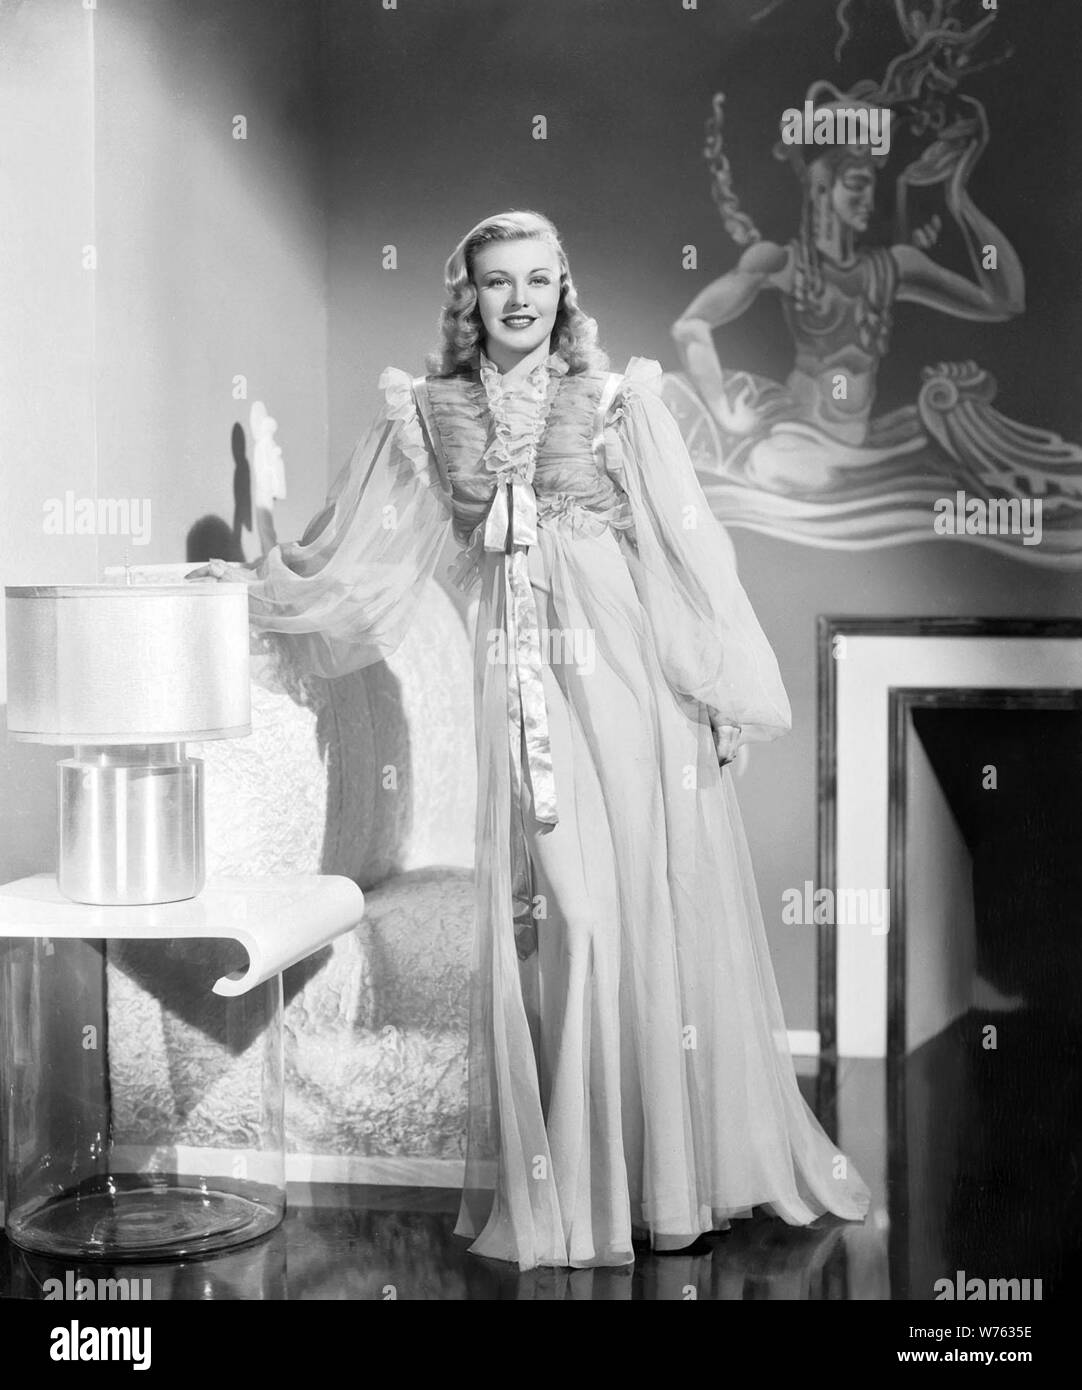 GINGER ROGERS in SHALL WE DANCE (1937), directed by MARK SANDRICH. Credit: RKO / Album Stock Photo